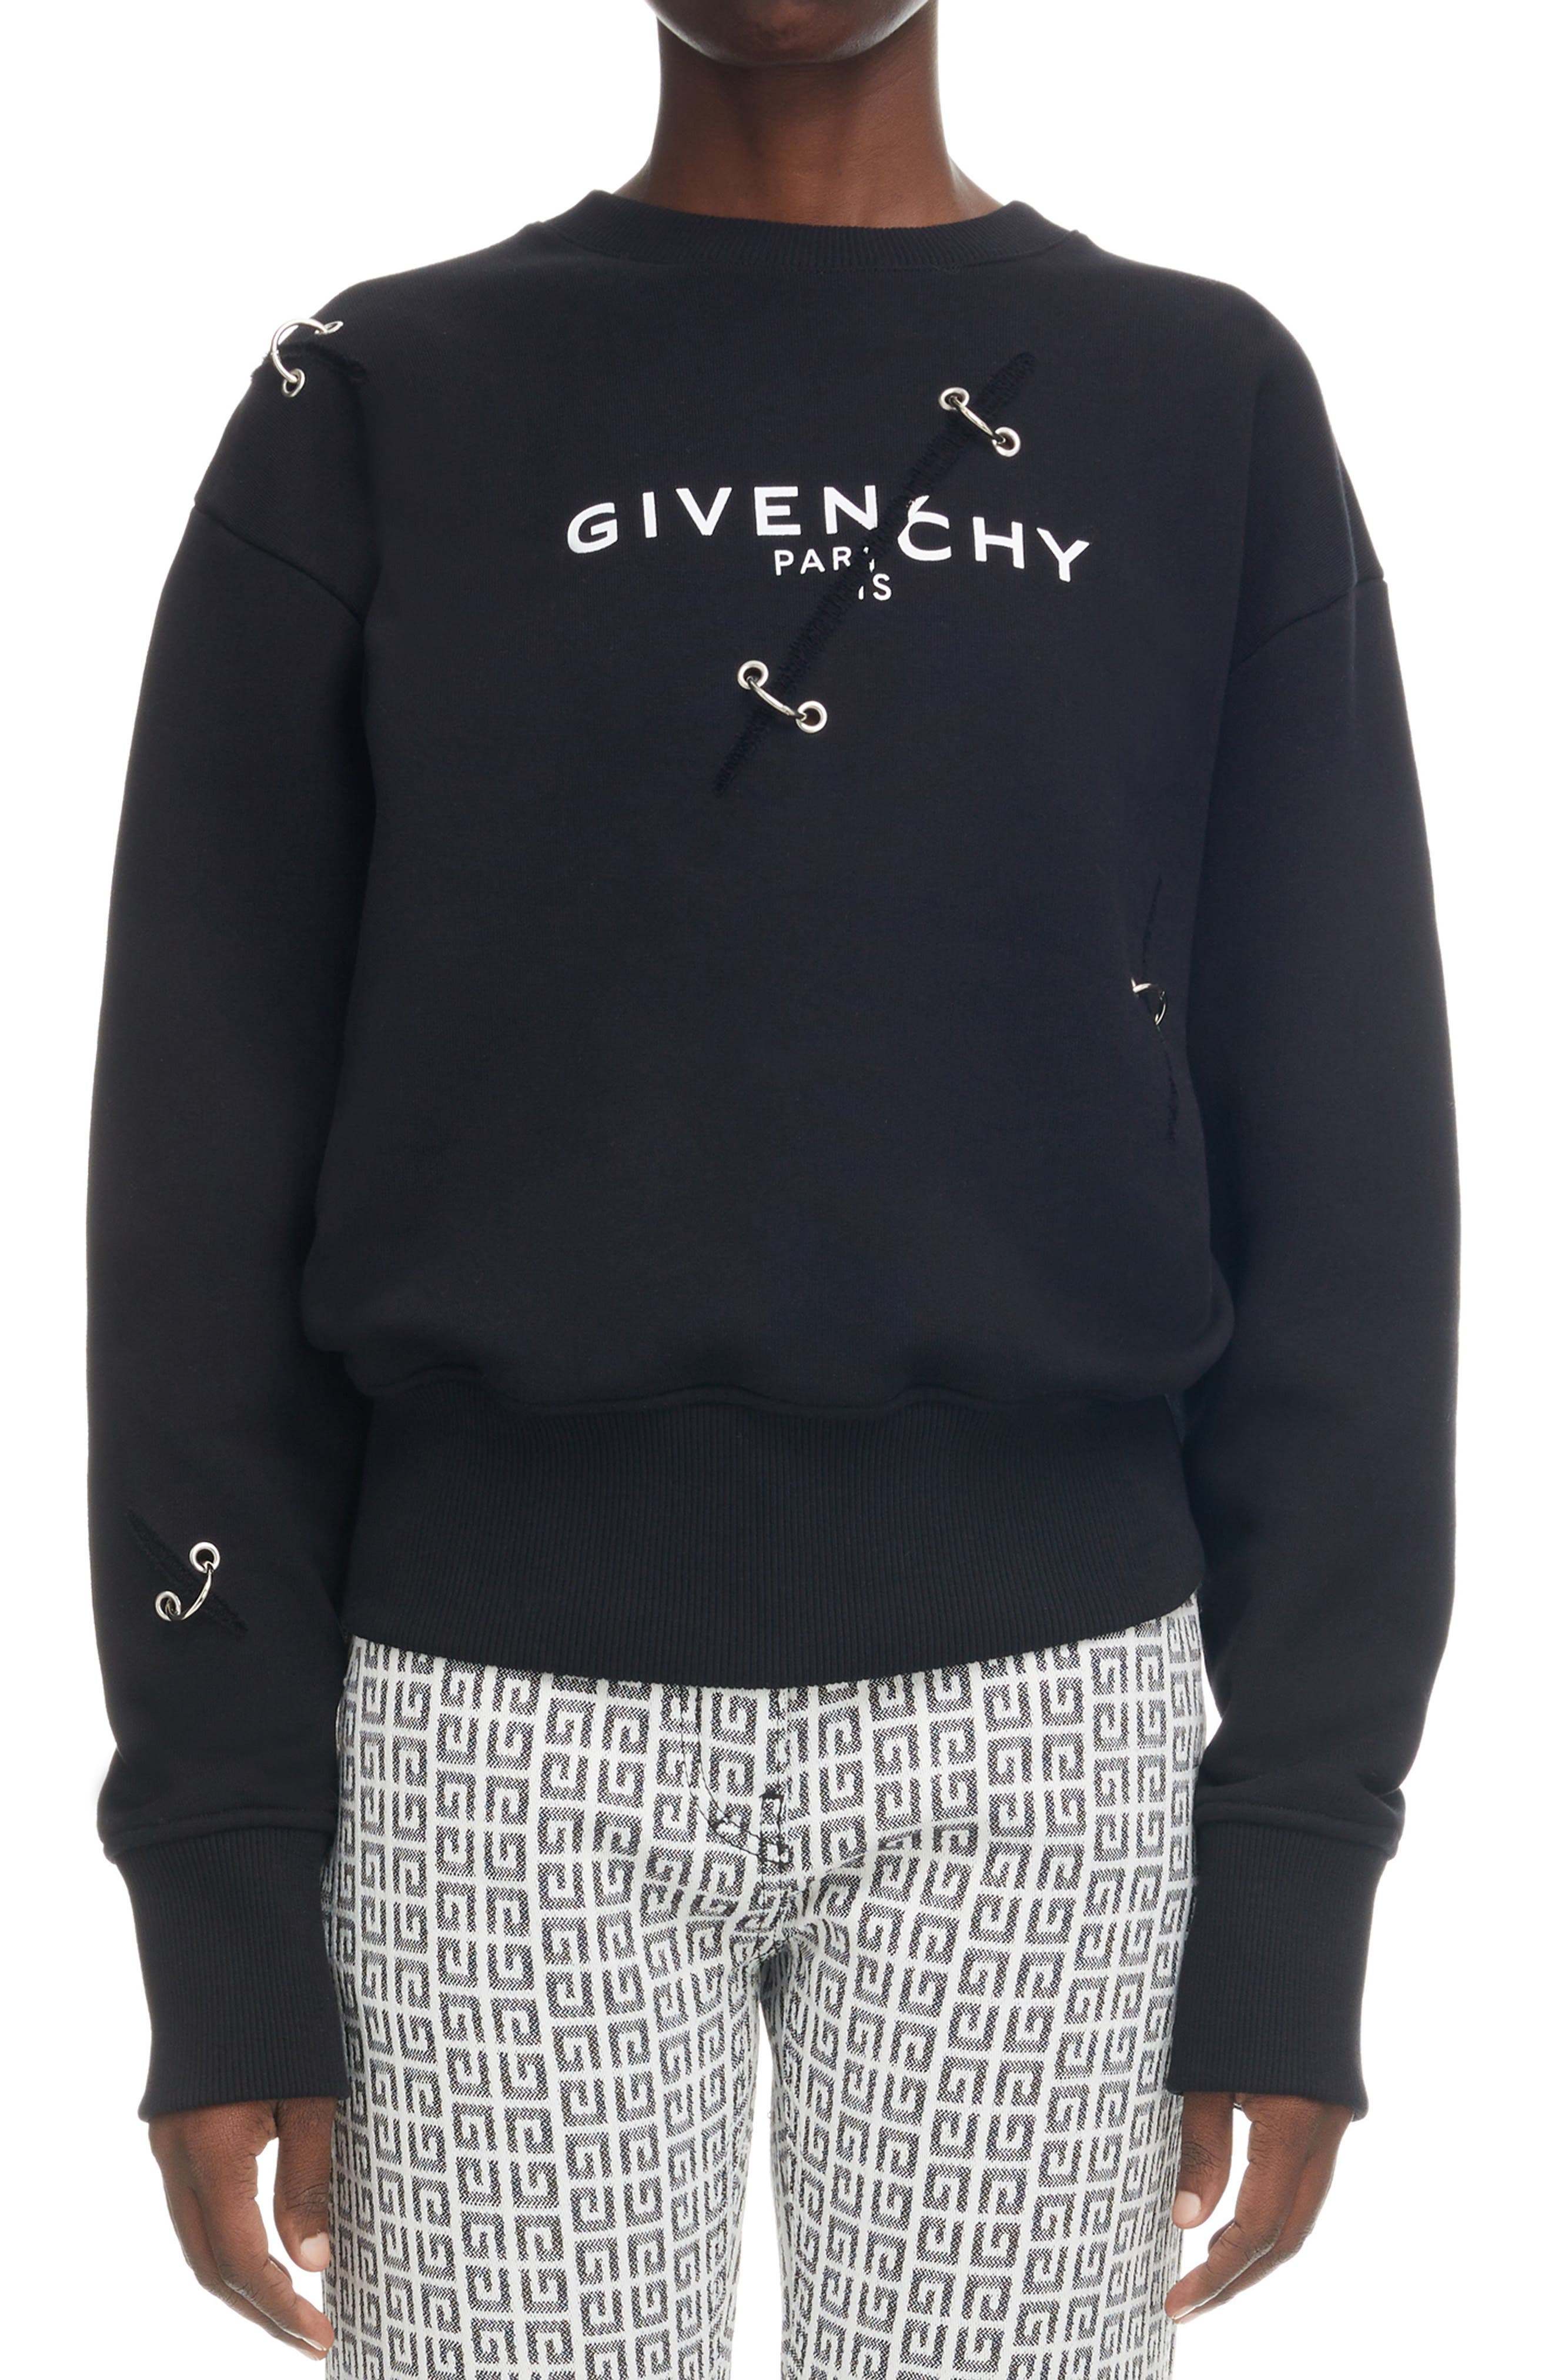 womens givenchy hoodie